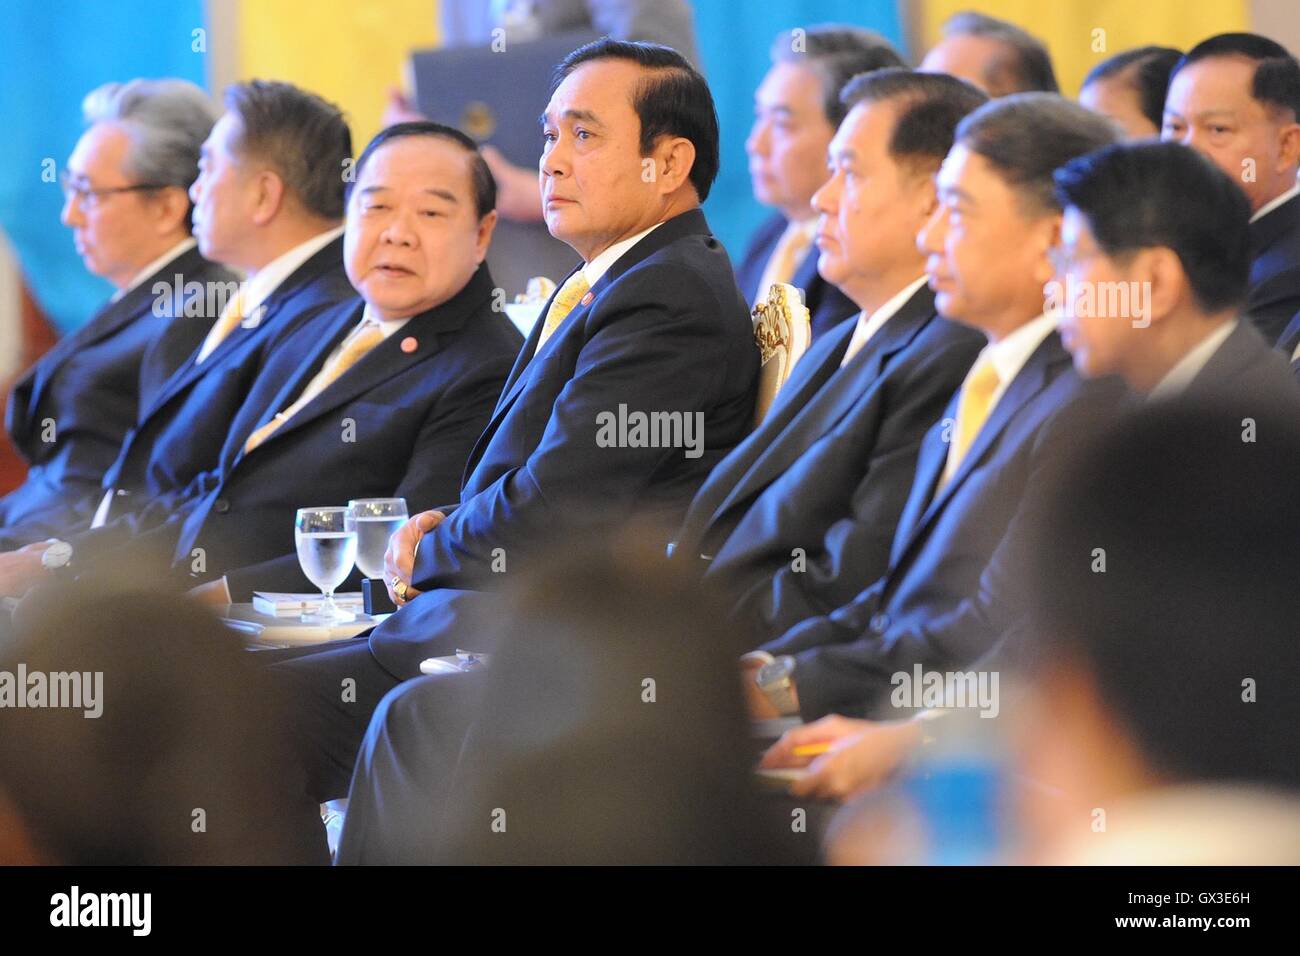 Bangkok, Thailand. 15th Sep, 2016. Thai Prime Minister Prayut Chan-o-cha (4th L) attends a press conference on the performances of the government during the last two years, at the Thai Government House in Bangkok, capital of Thailand, on Sept. 15, 2016. Thailand could potentially upgrade itself from the long-standing status of a Third World developing country to a 'First World' developed country, Thai Prime Minister Prayut Chan-o-cha said on Thursday. © Rachen Sageamsak/Xinhua/Alamy Live News Stock Photo